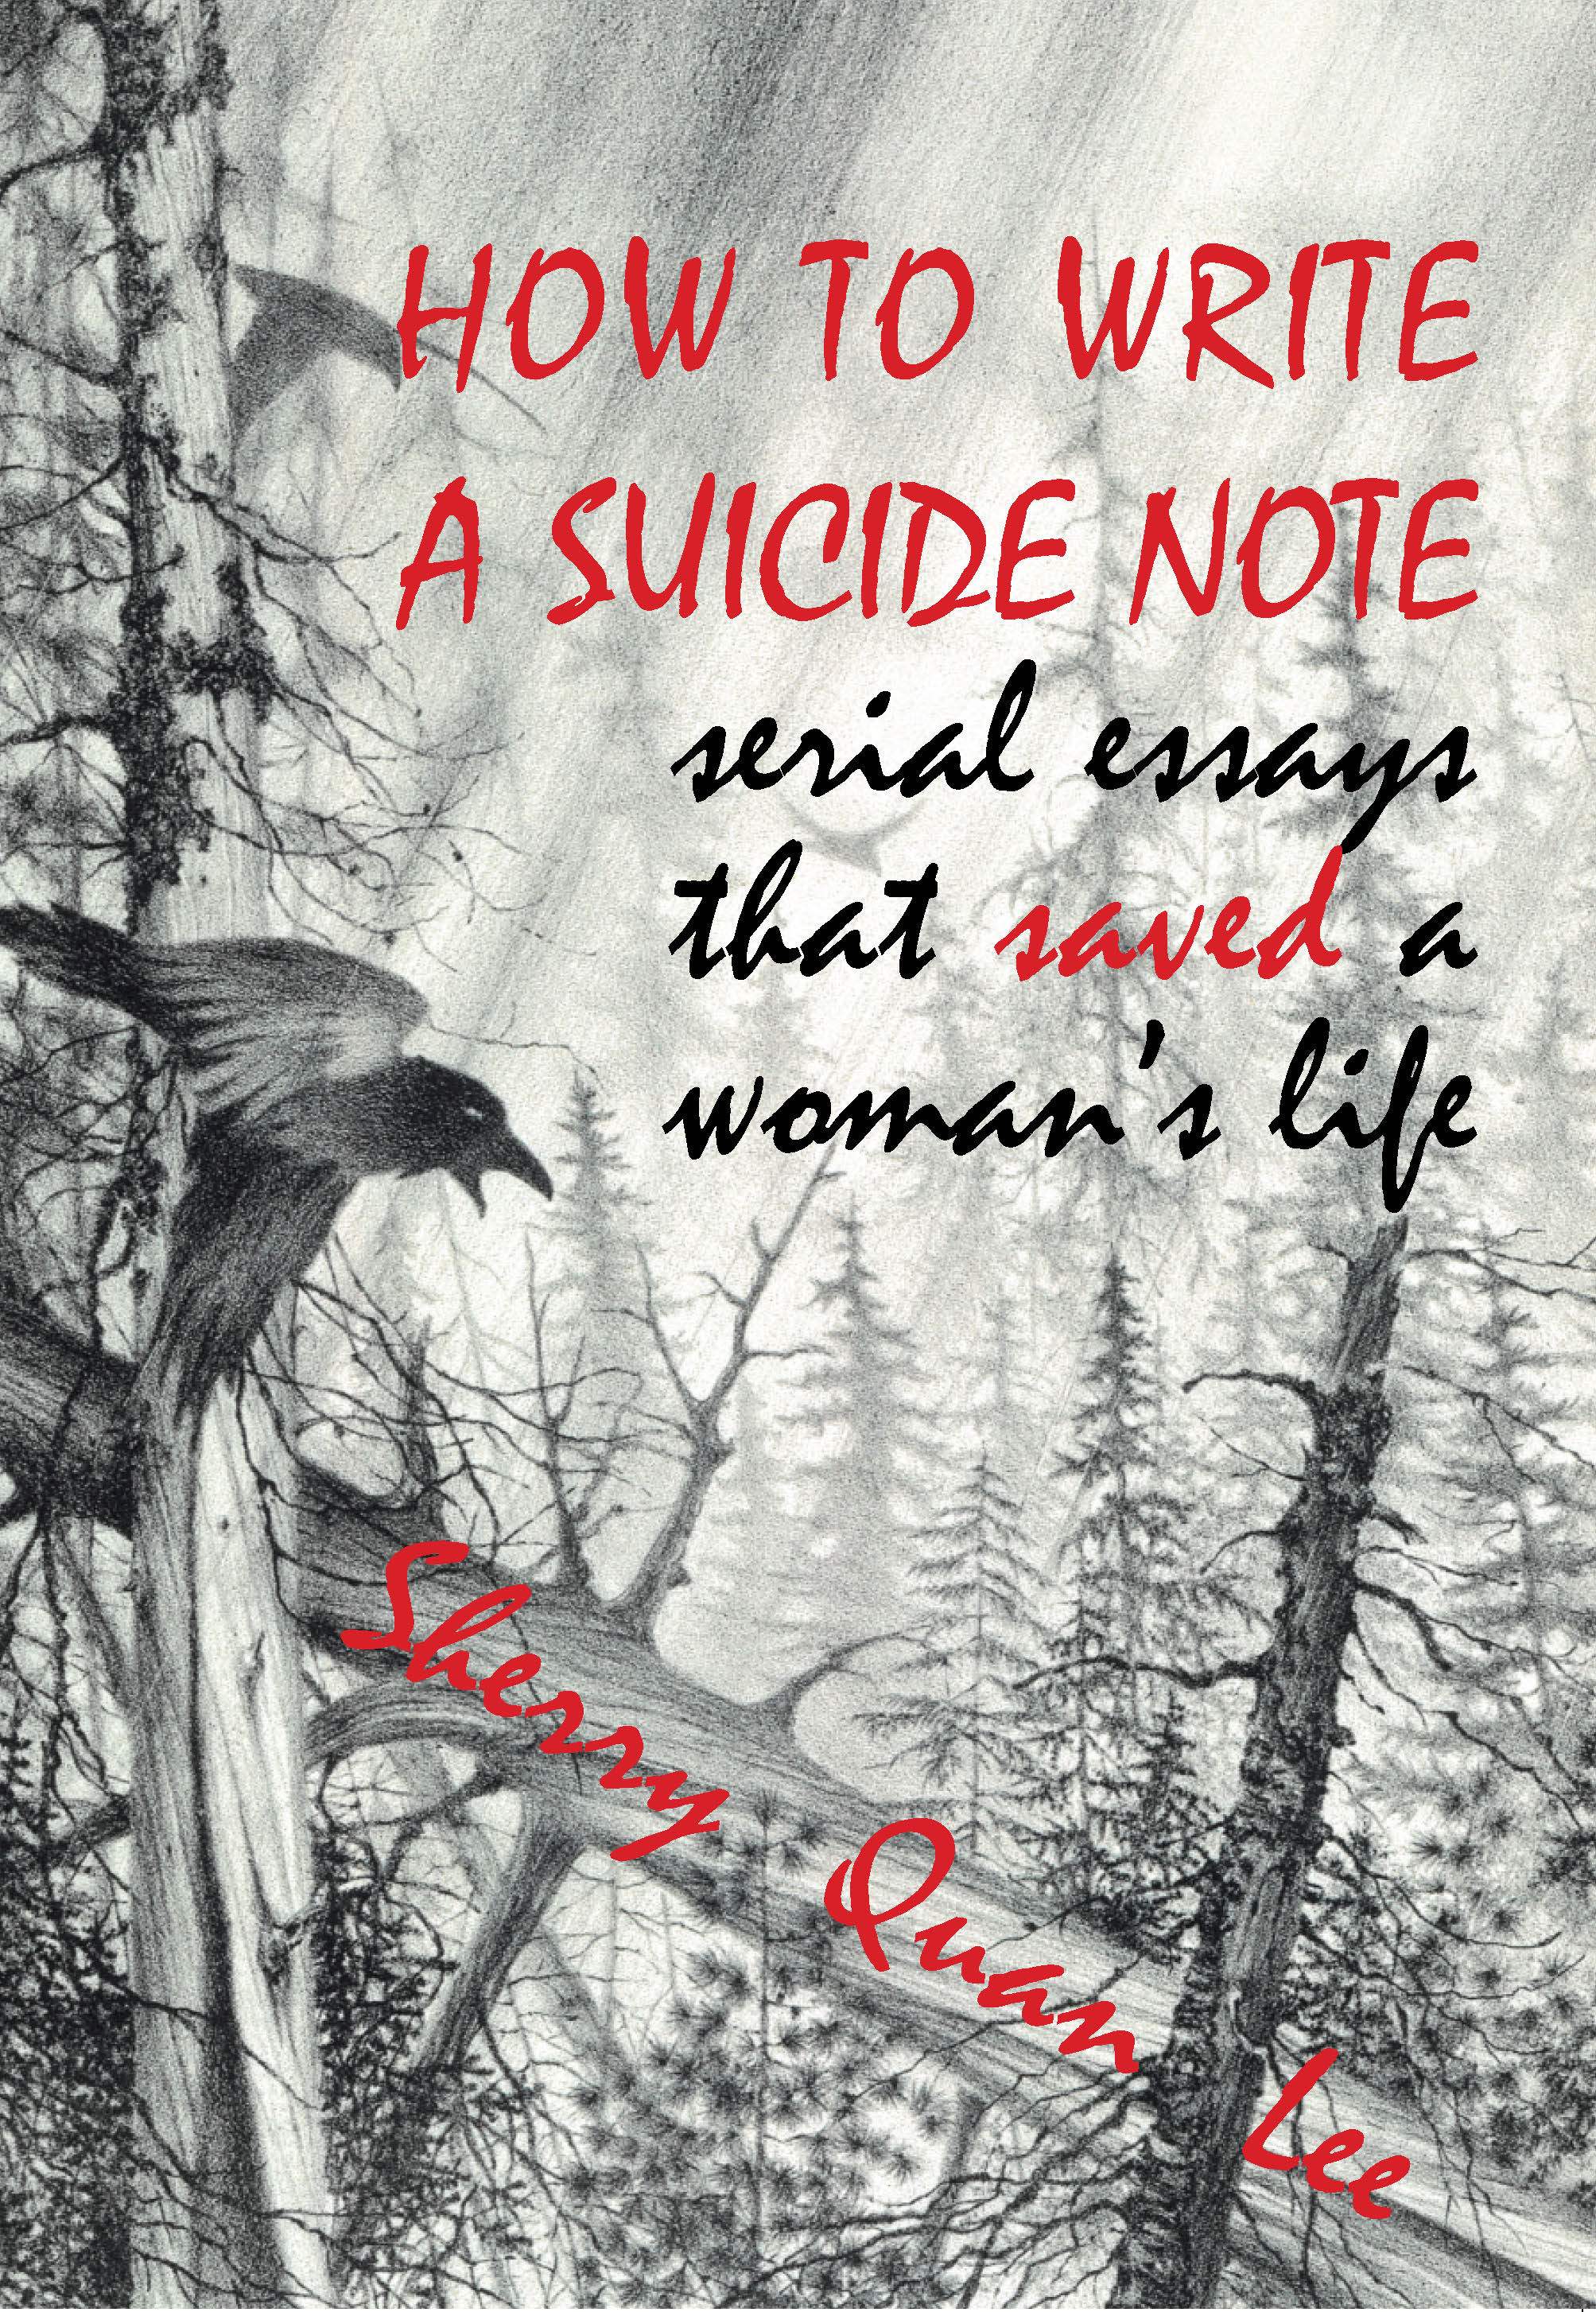 How to Write a Suicide Note: serial essays that saved a woman's life